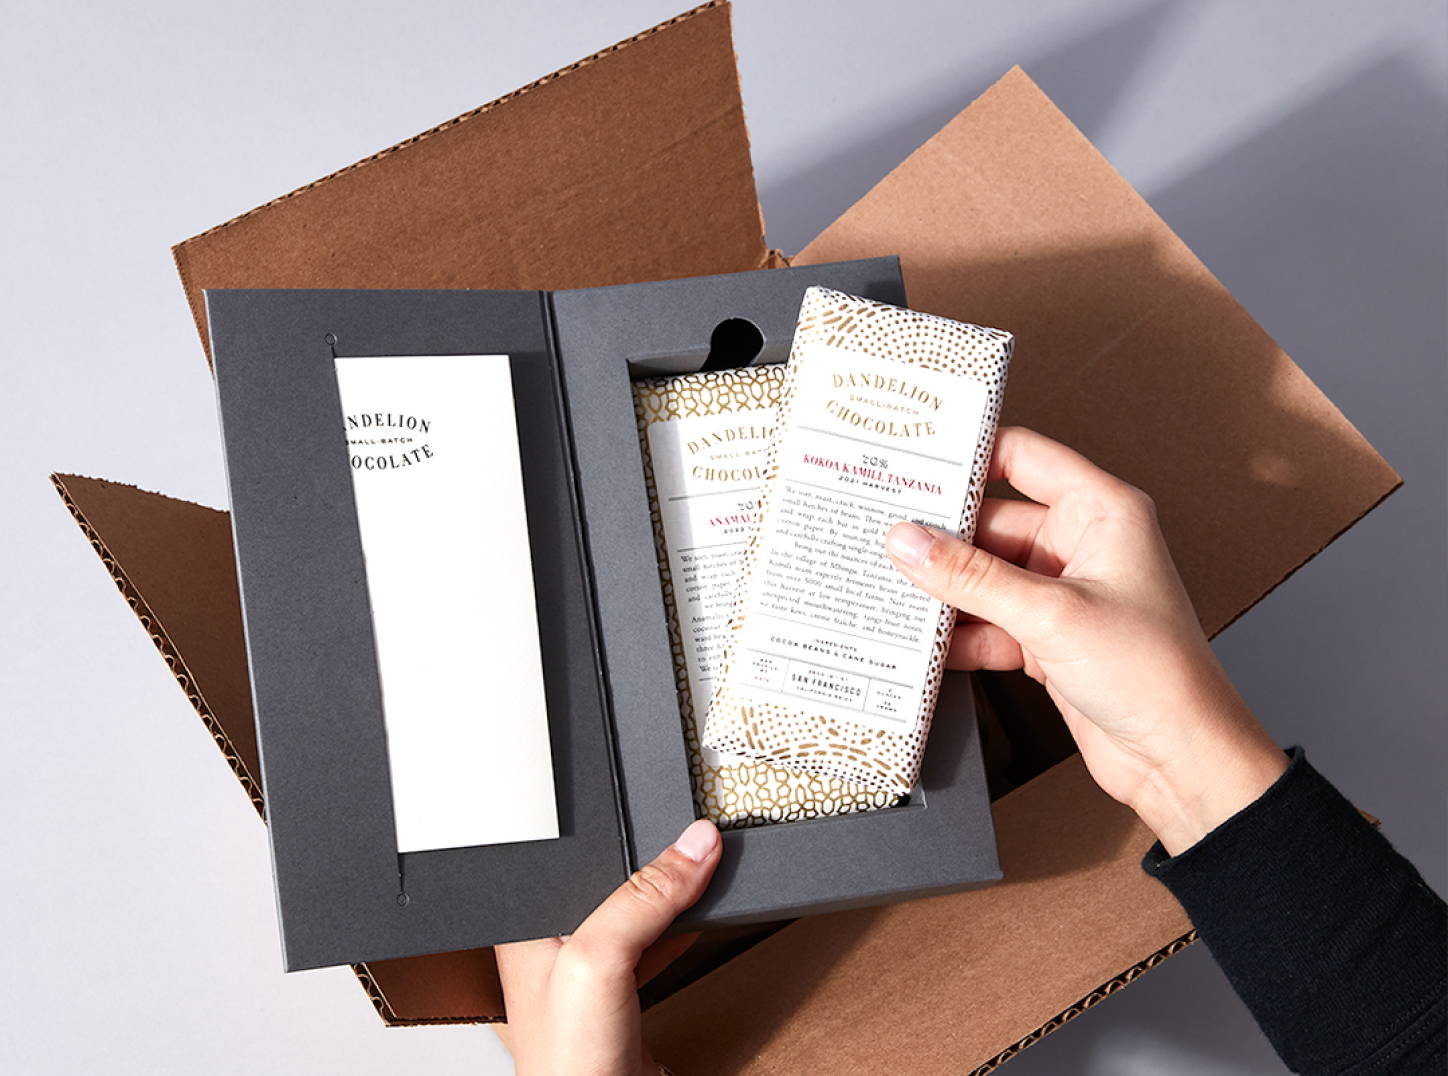 The Dandelion subscription chocolate bar packaging